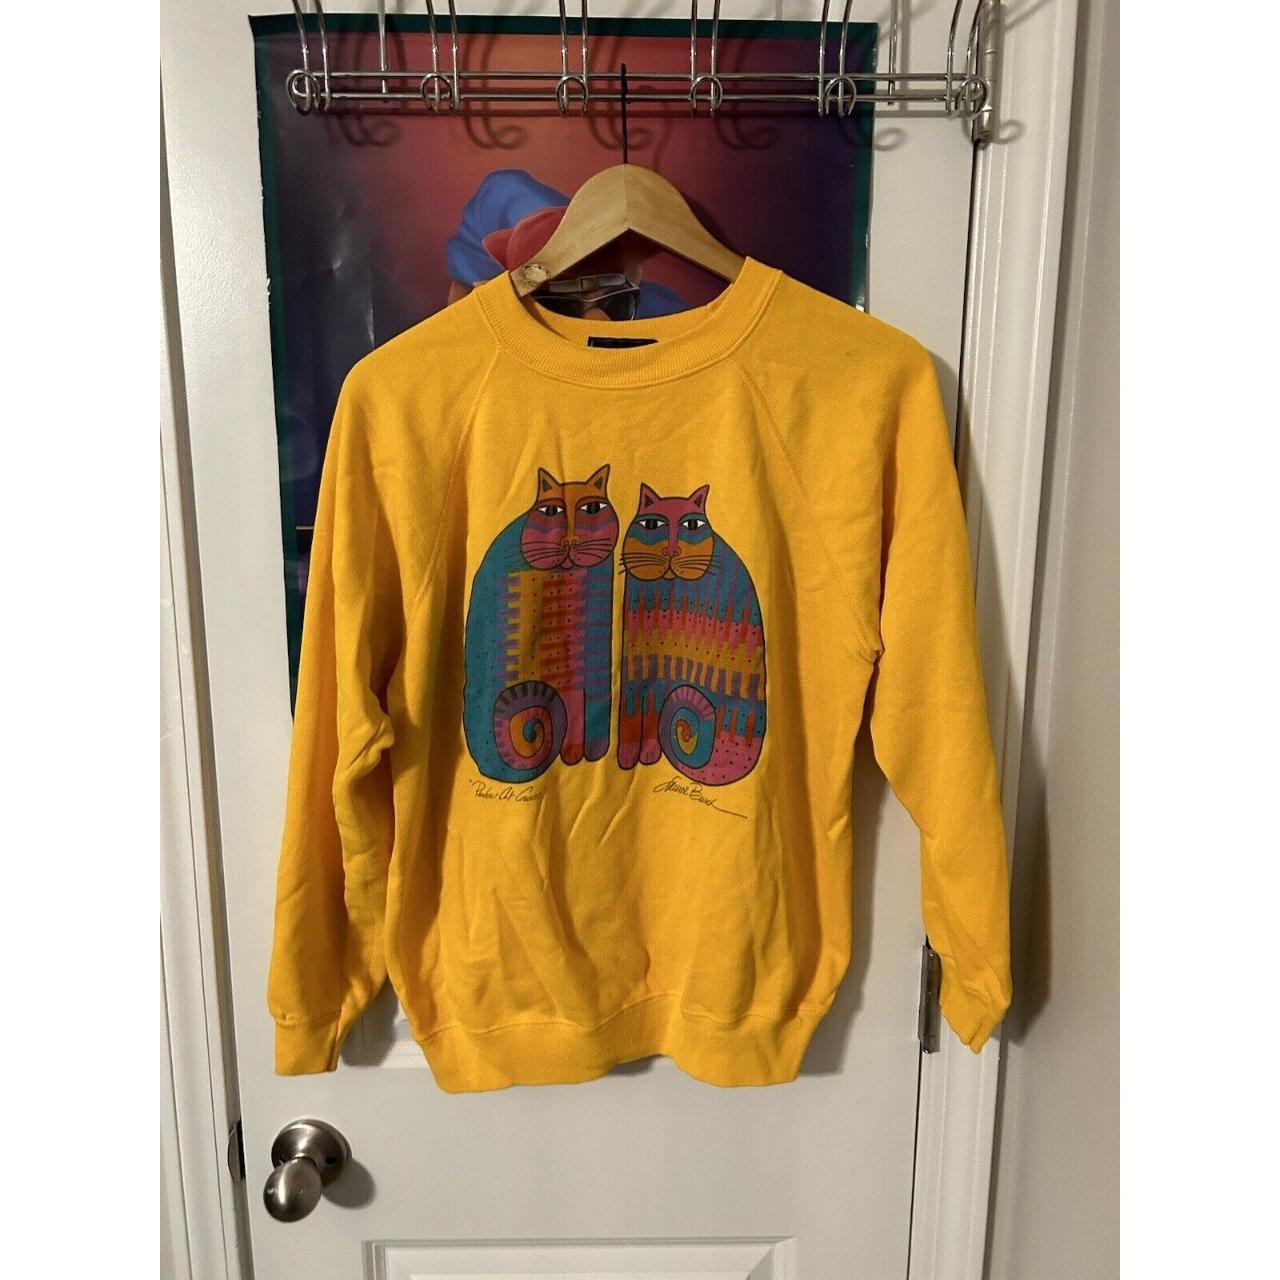 item listed by triadthrift336